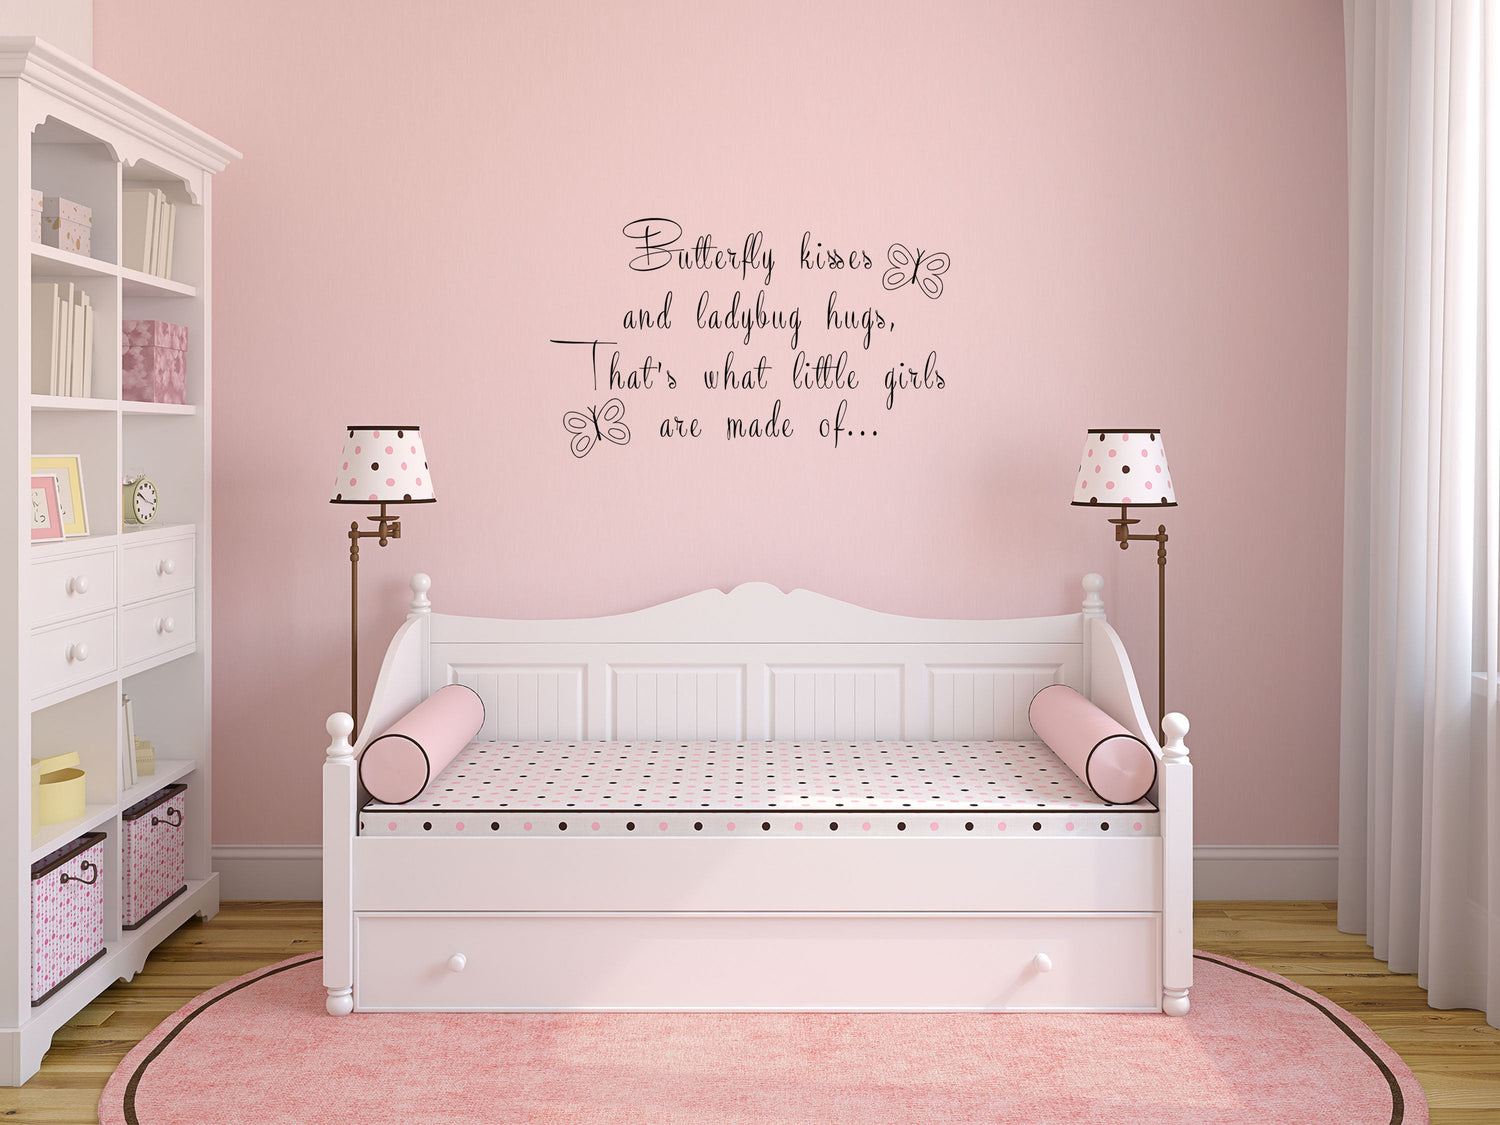 That's What Little Girls Are Made Of Butterfly Kisses - Inspirational Wall Signs Vinyl Wall Decal Inspirational Wall Signs 